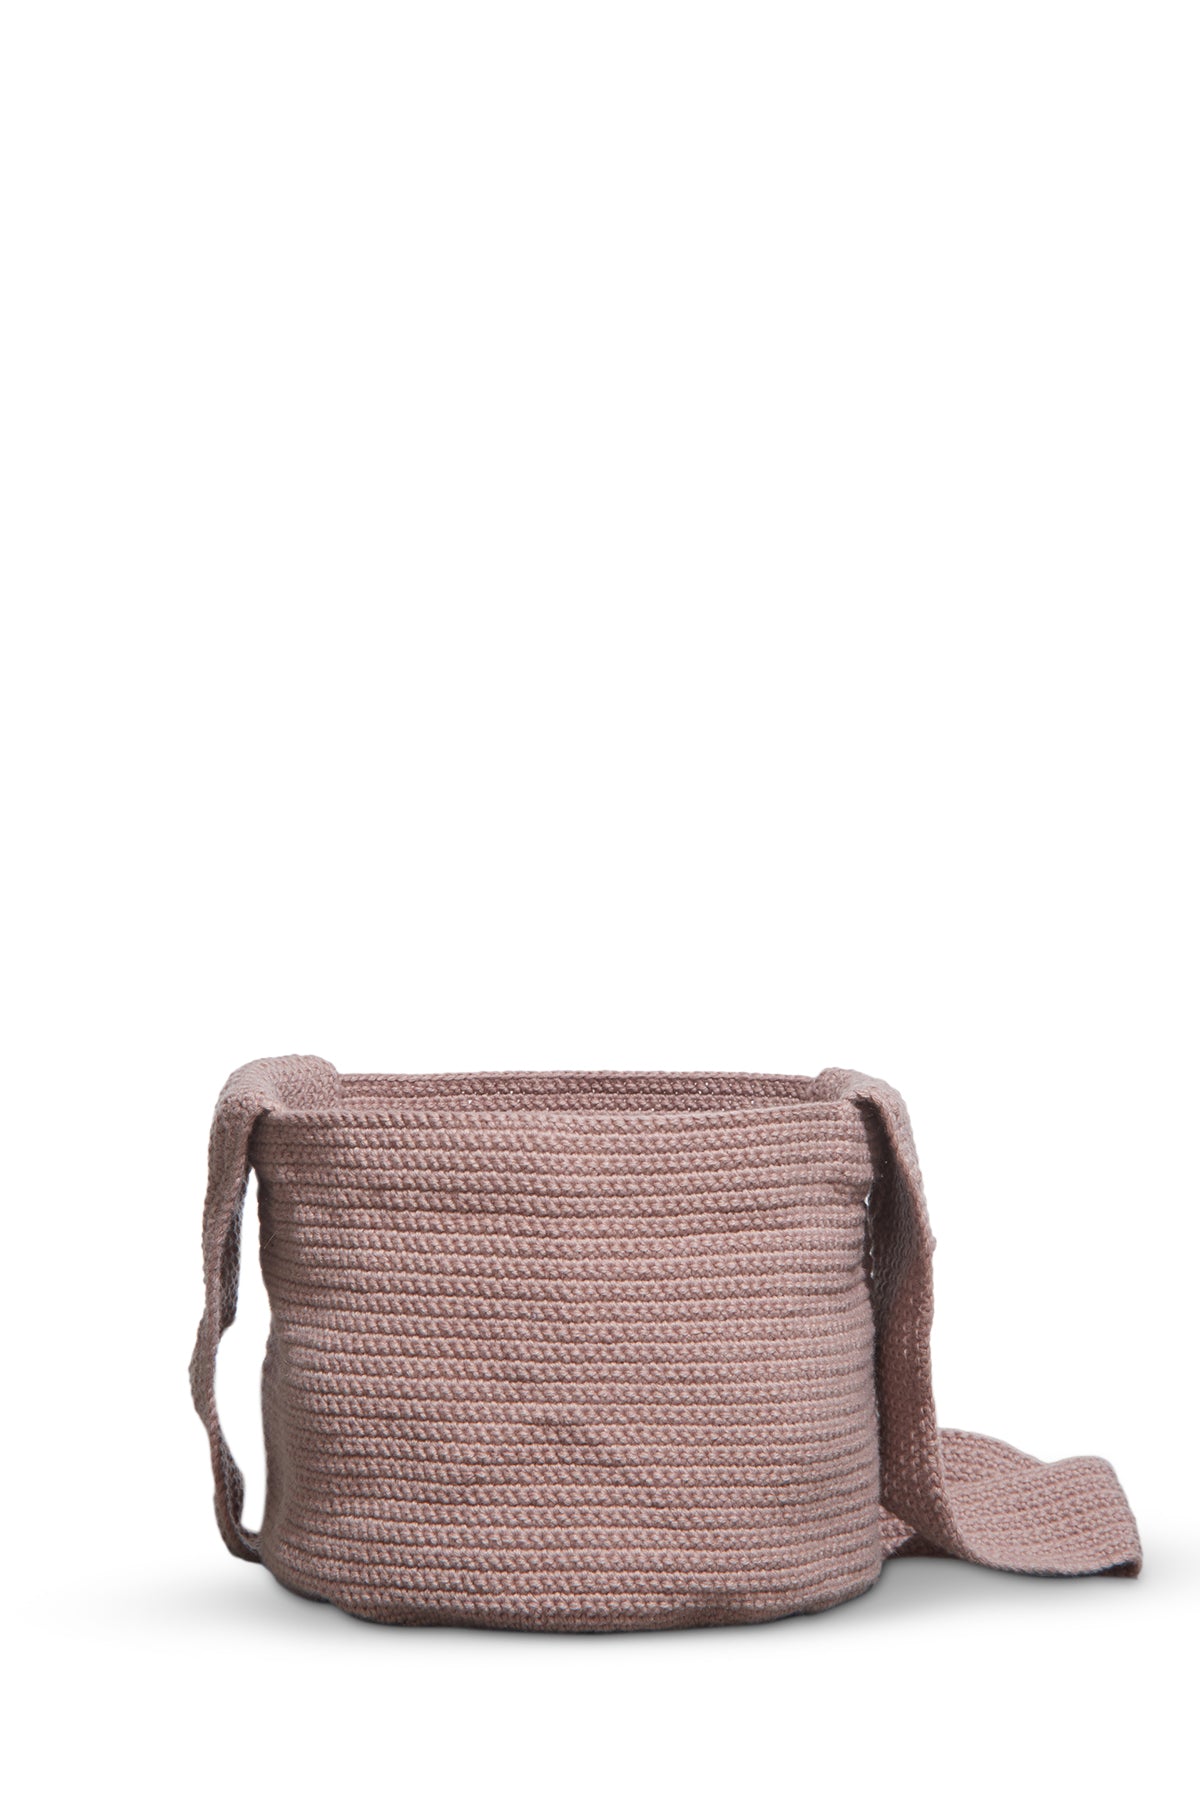 Crossover Knit Bag in Nude Cashmere